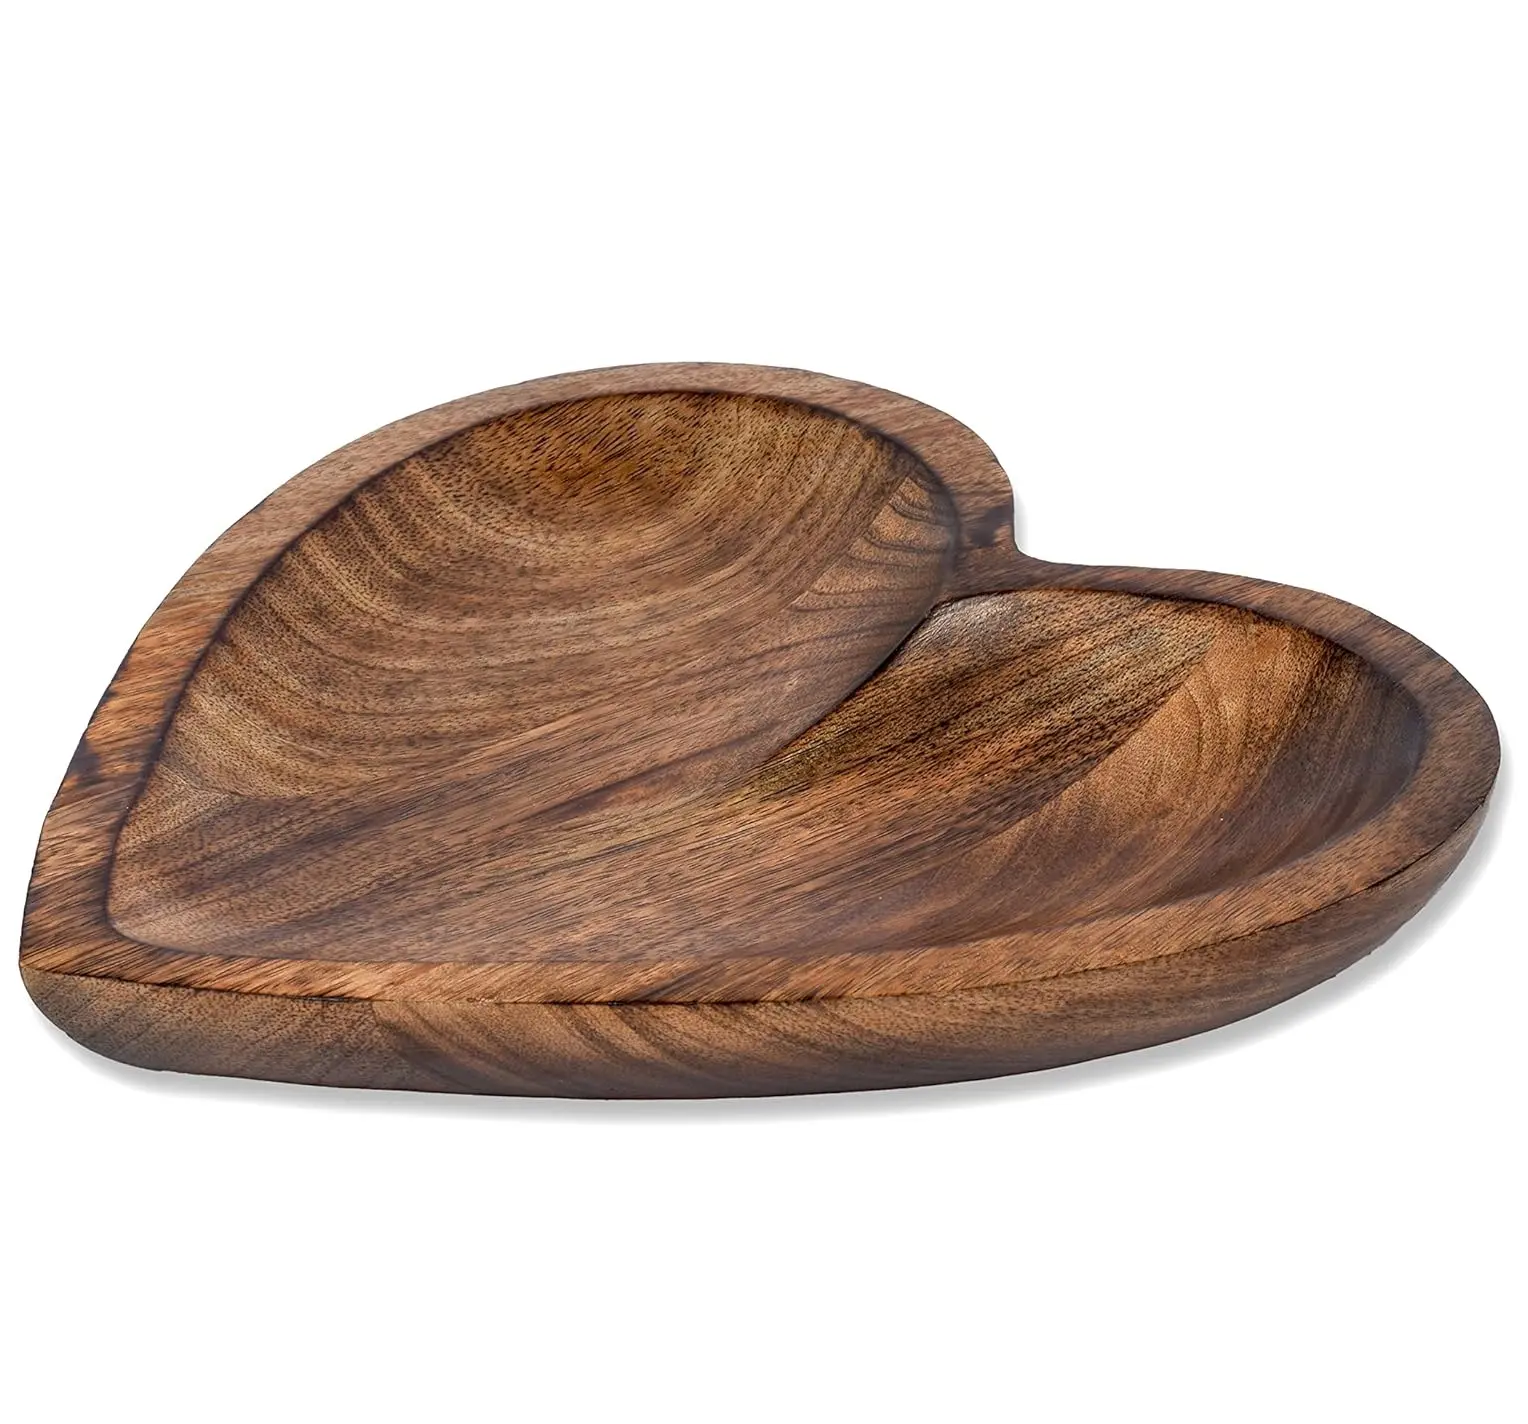 Mango Wood Heart Curved Shaped Decorative Bowl for Table Centerpieces Home Party Wedding Decor (10" x 10" x 1.5")